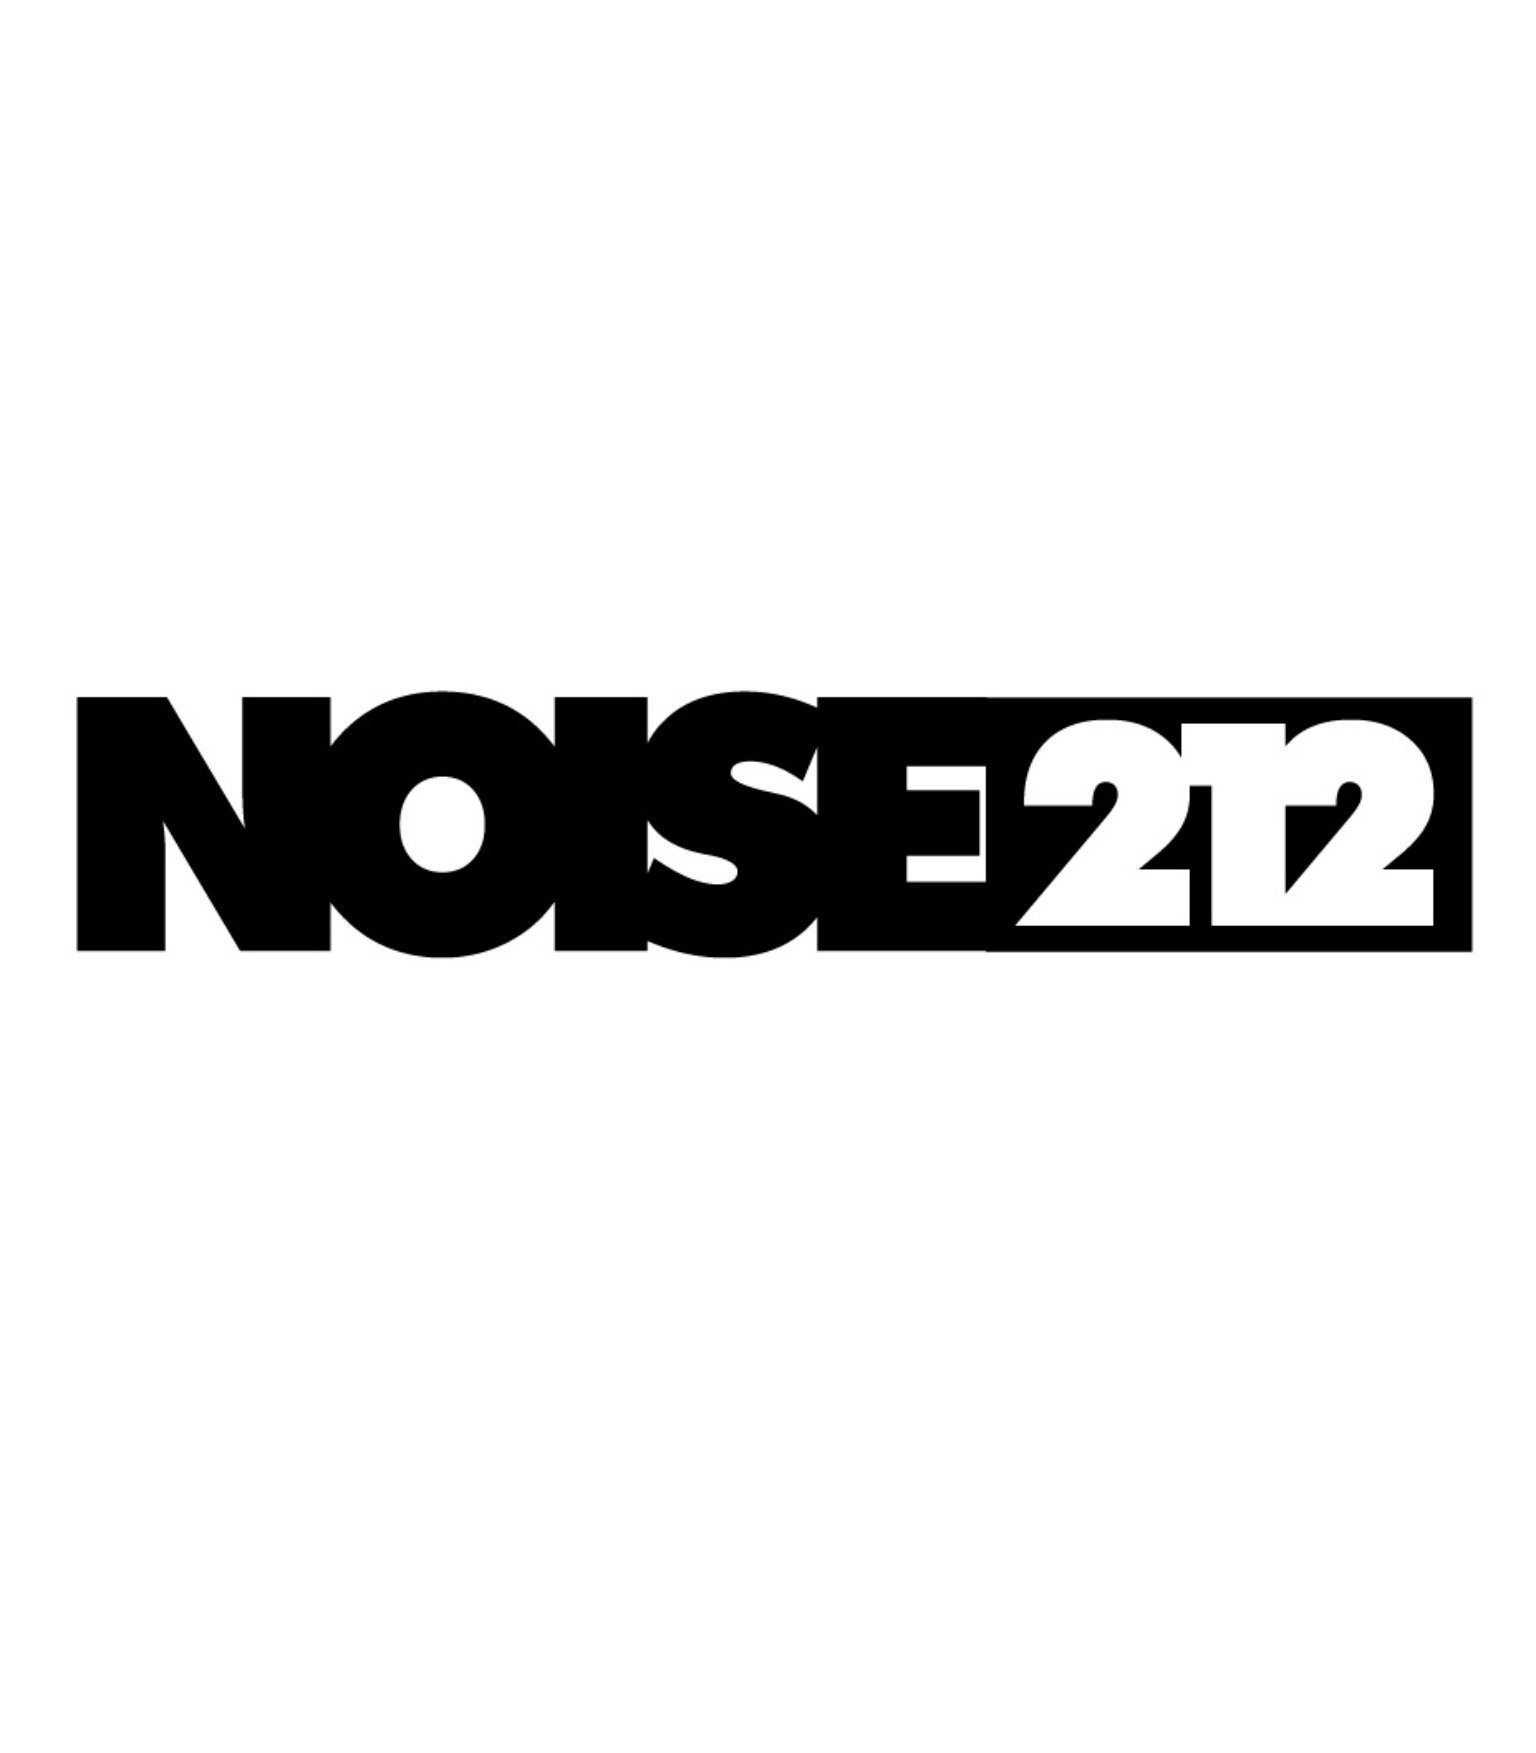 EST. 2009 | #DJ | #musicproduction | NOISE212 Labs - modern #musiceducation specializing in DJ and music production training in New York City.